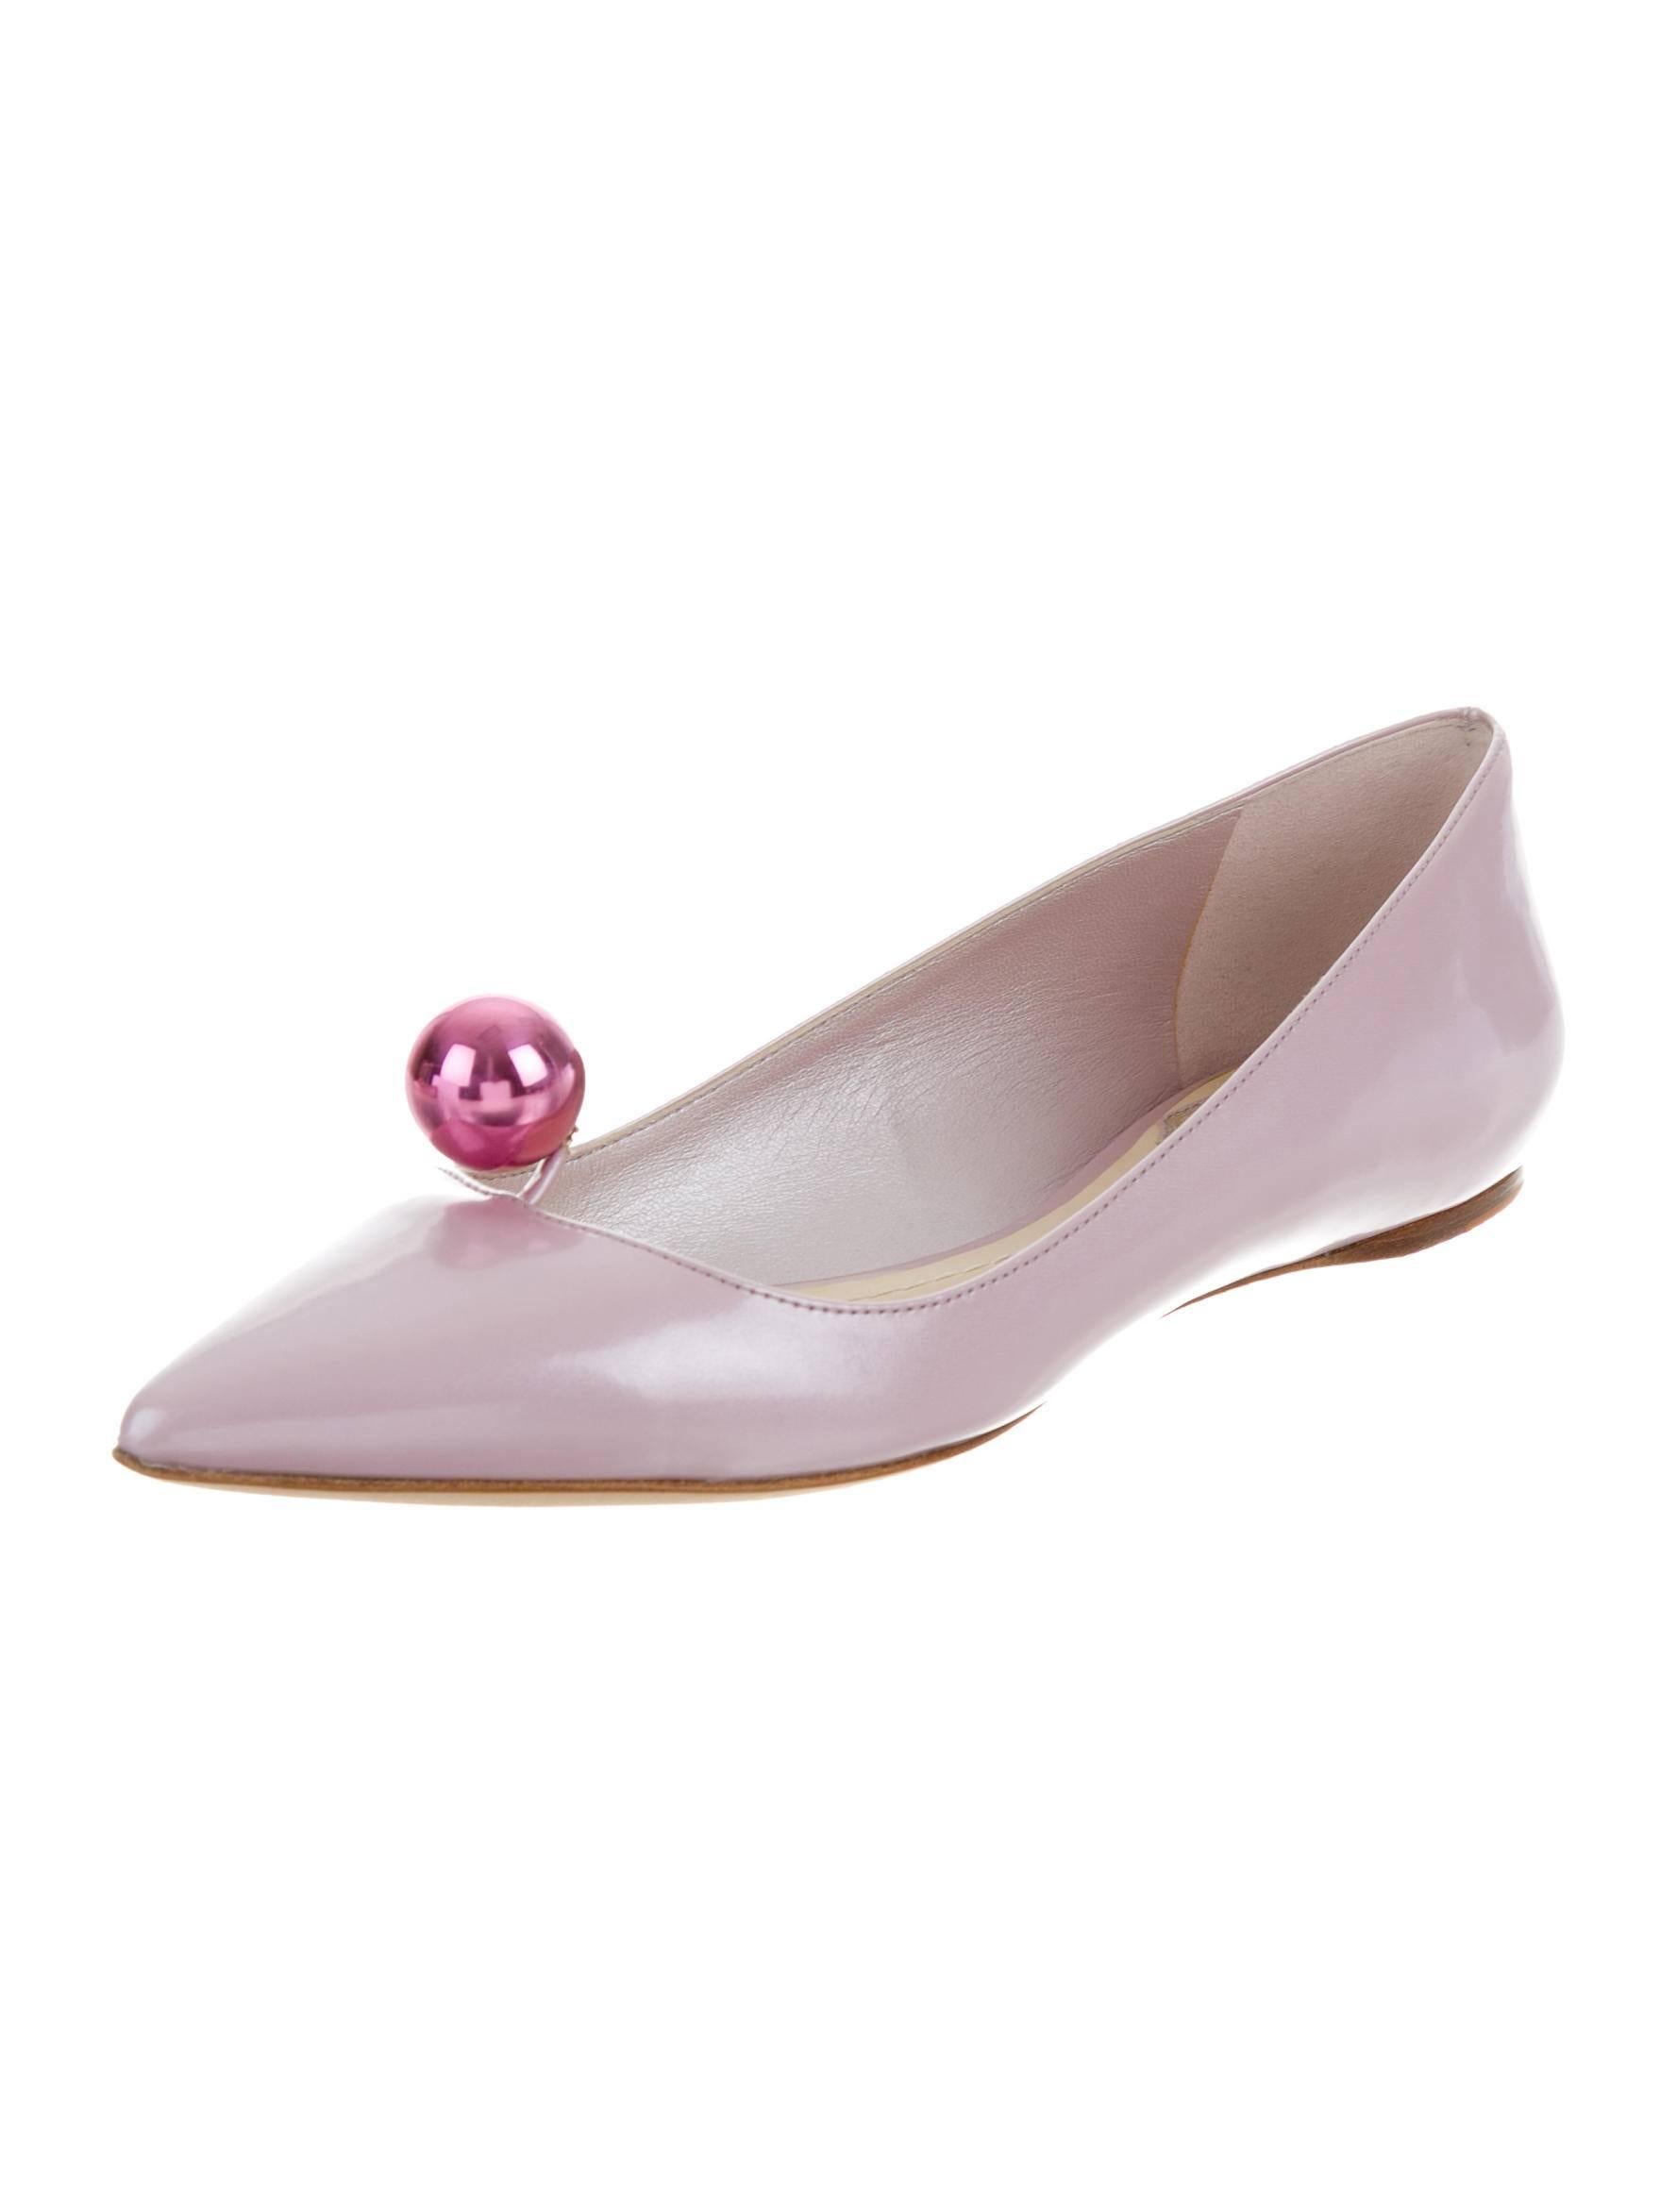 Gray Christian Dior NEW & SOLD Pink Patent Ball Evening Flats in Box